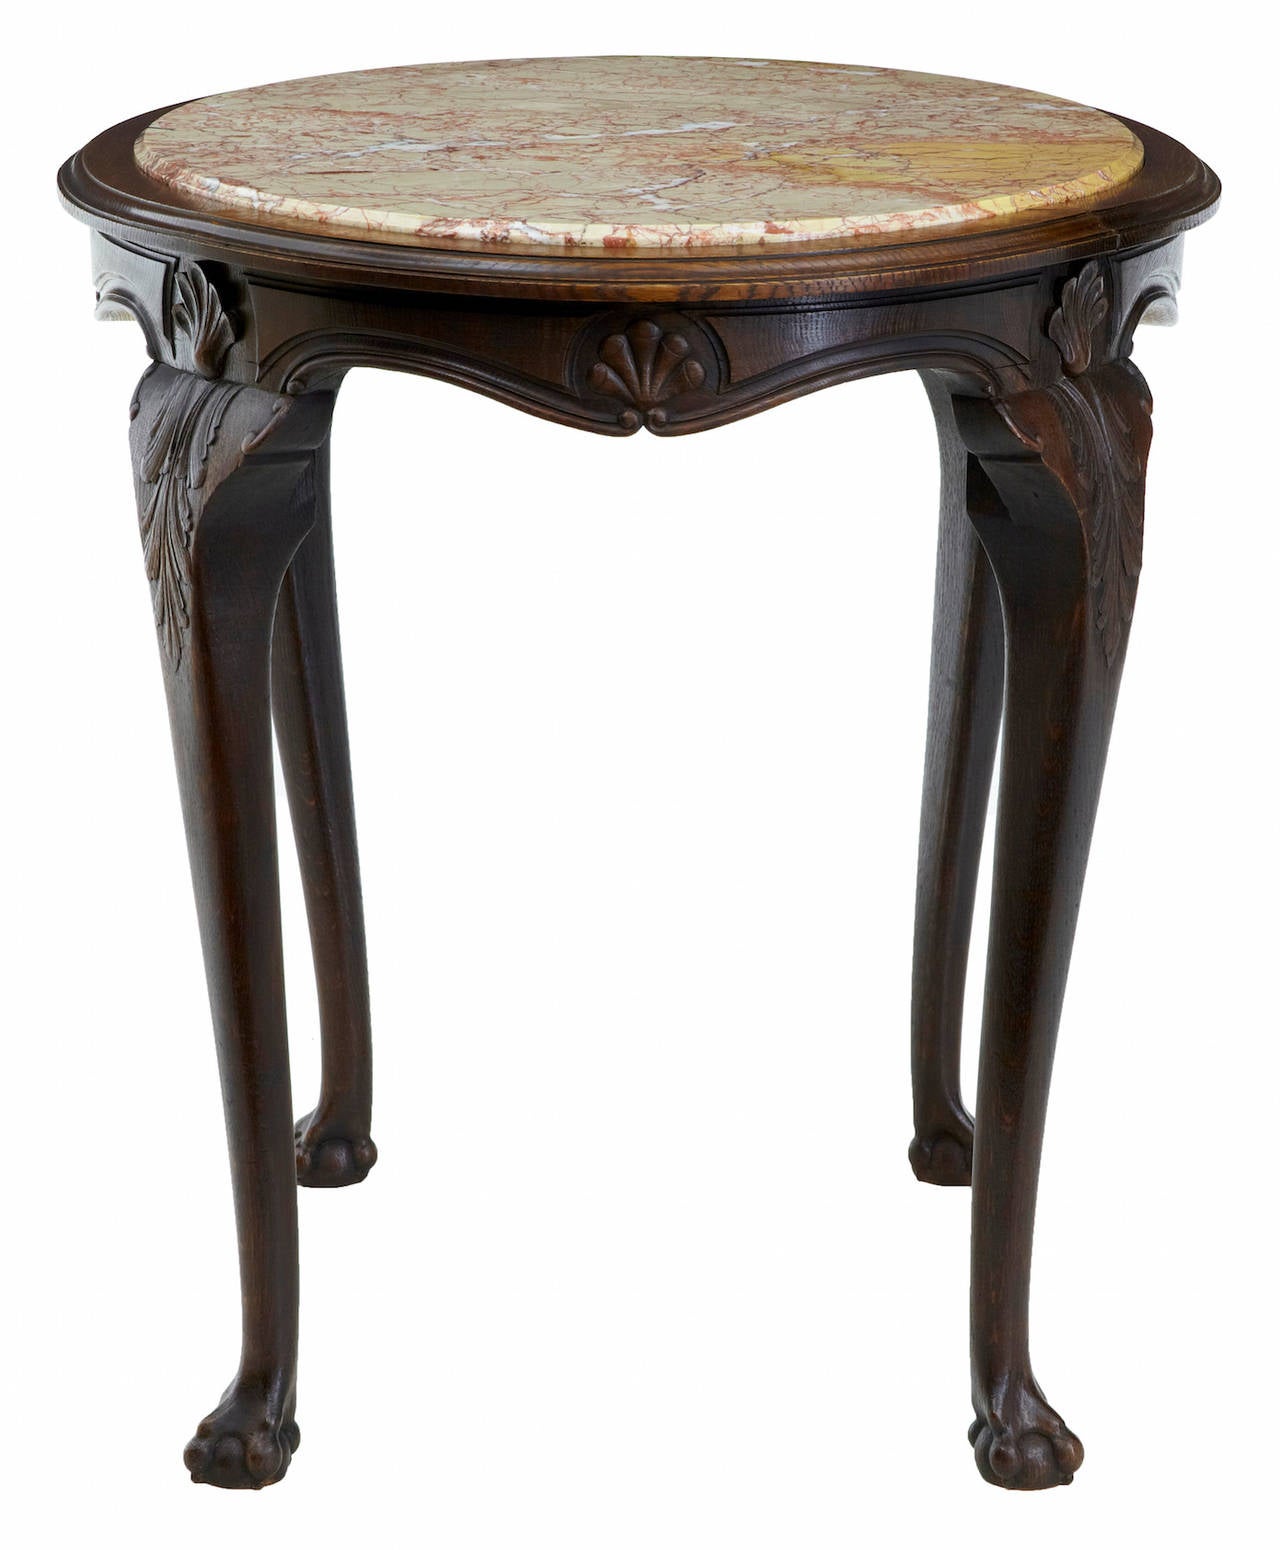 Oval French marble top table, circa 1870.
Inset veined marble top, standing on carved cabriole legs with leaves and shells. Terminating on ball and claw feet.
Restoration to one side (photographed)

Measures: Height: 29 3/4